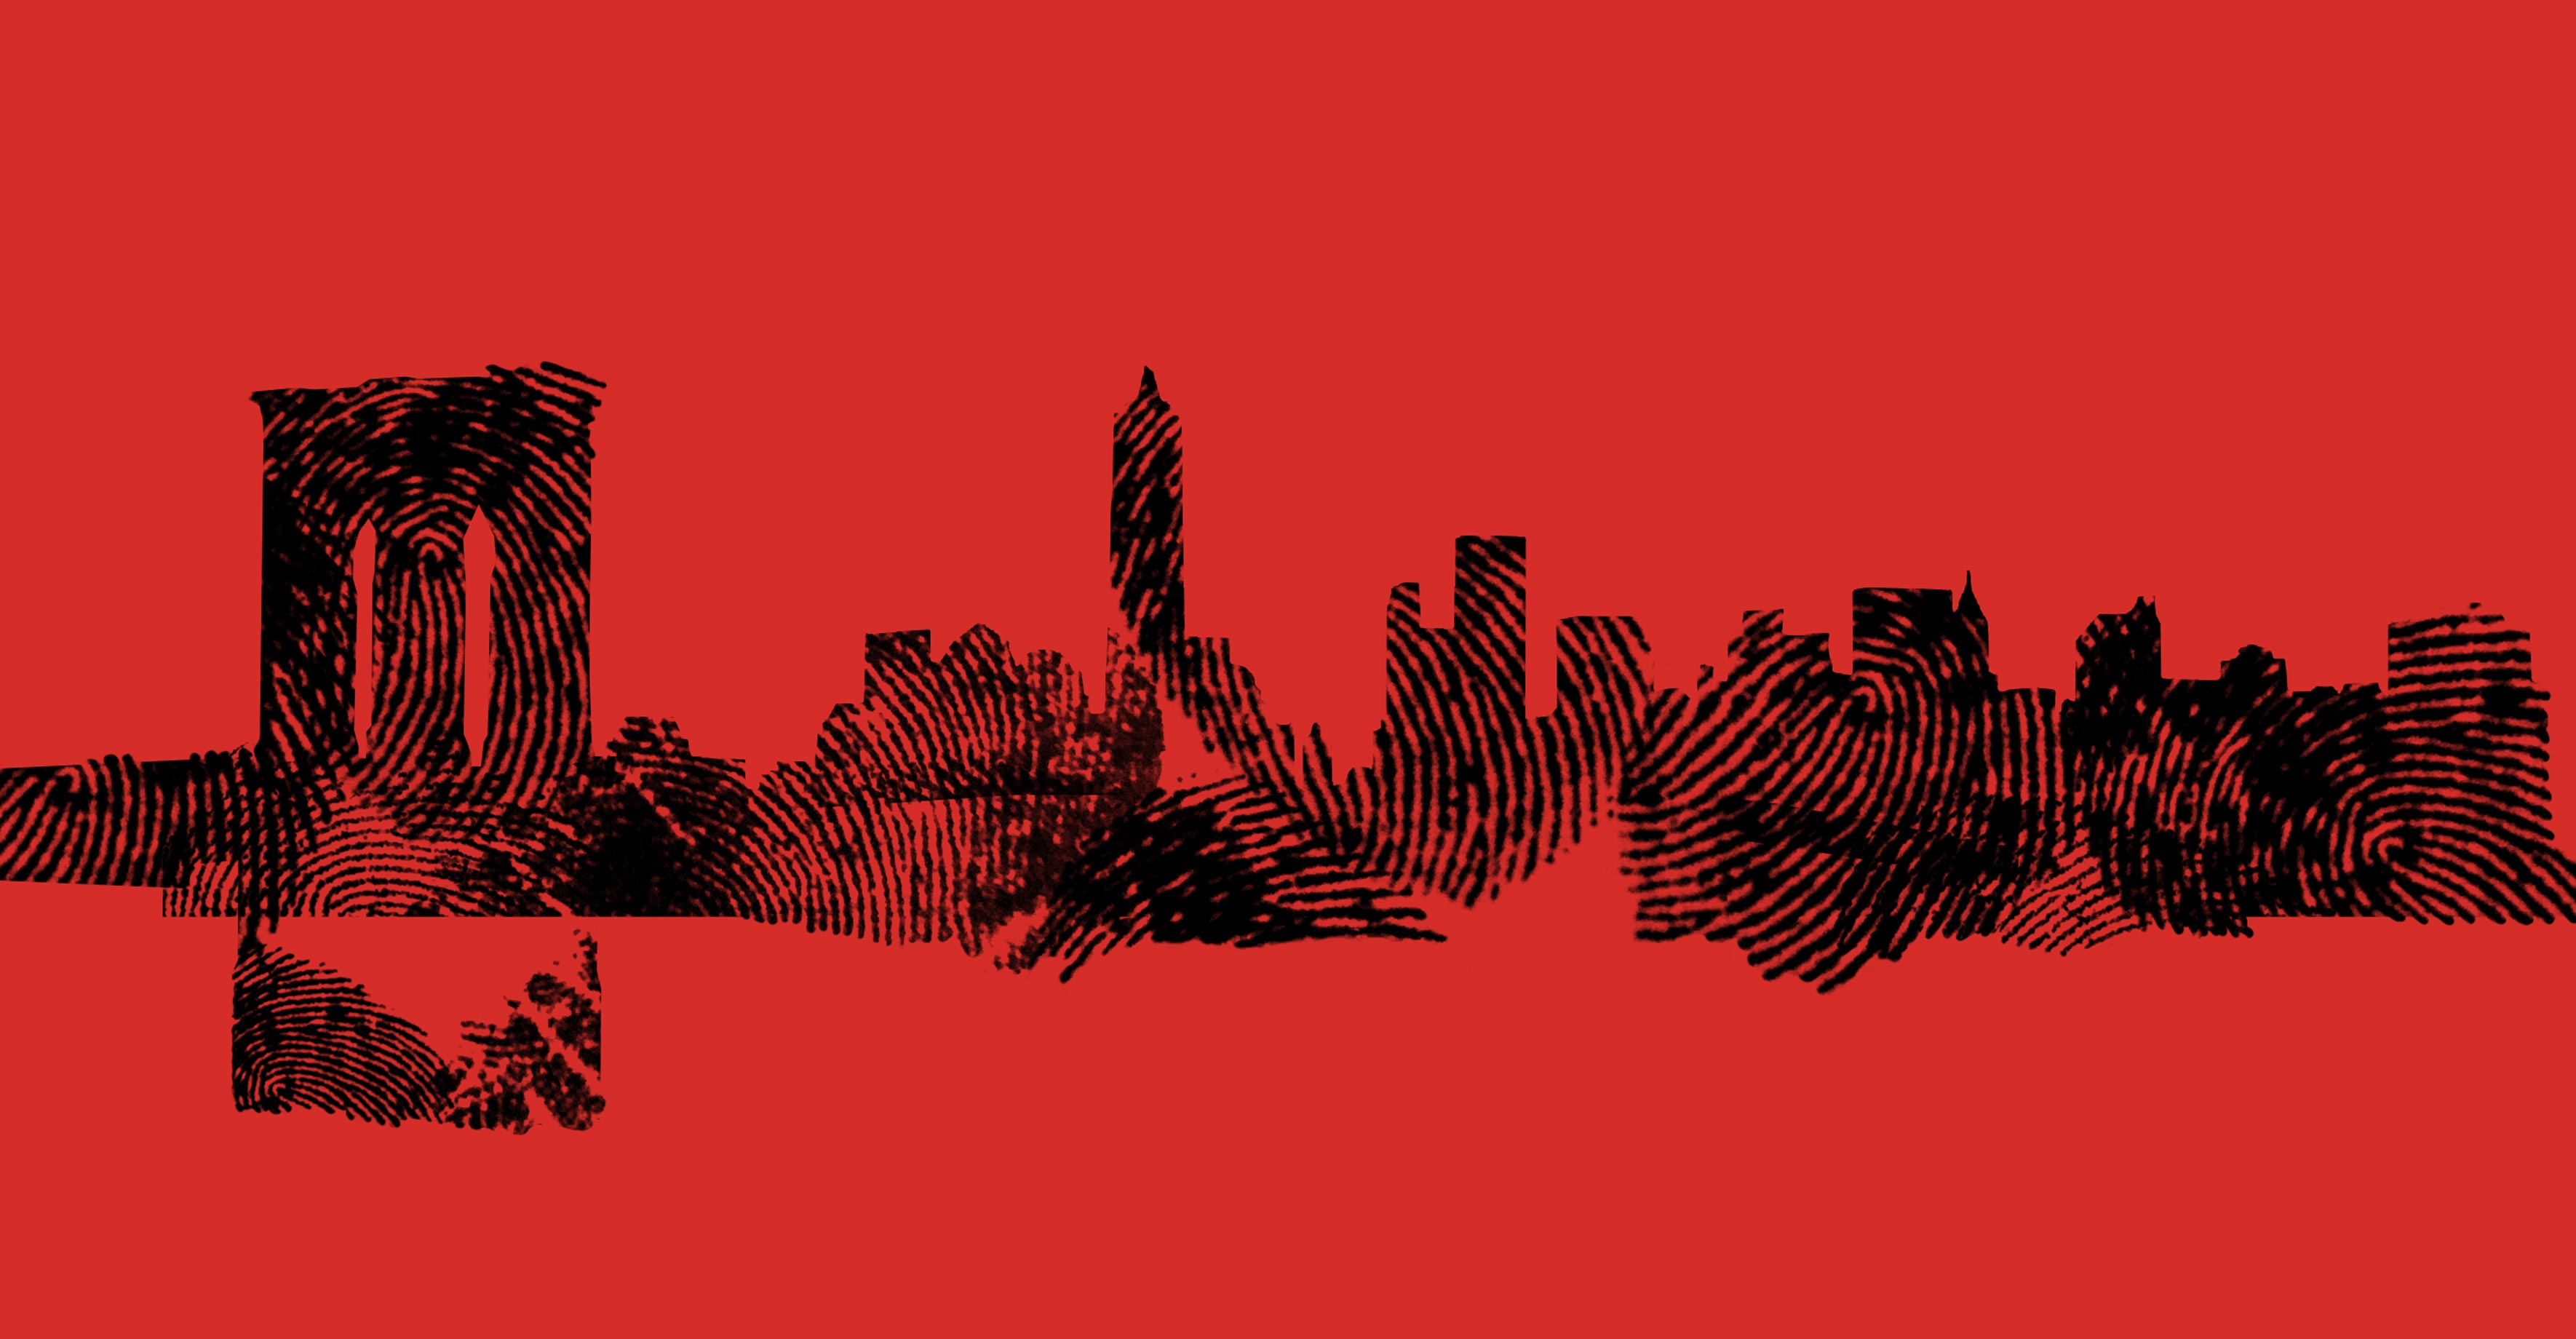 Fingerprints sketch out the Brooklyn Bridge and the NYC skyline.